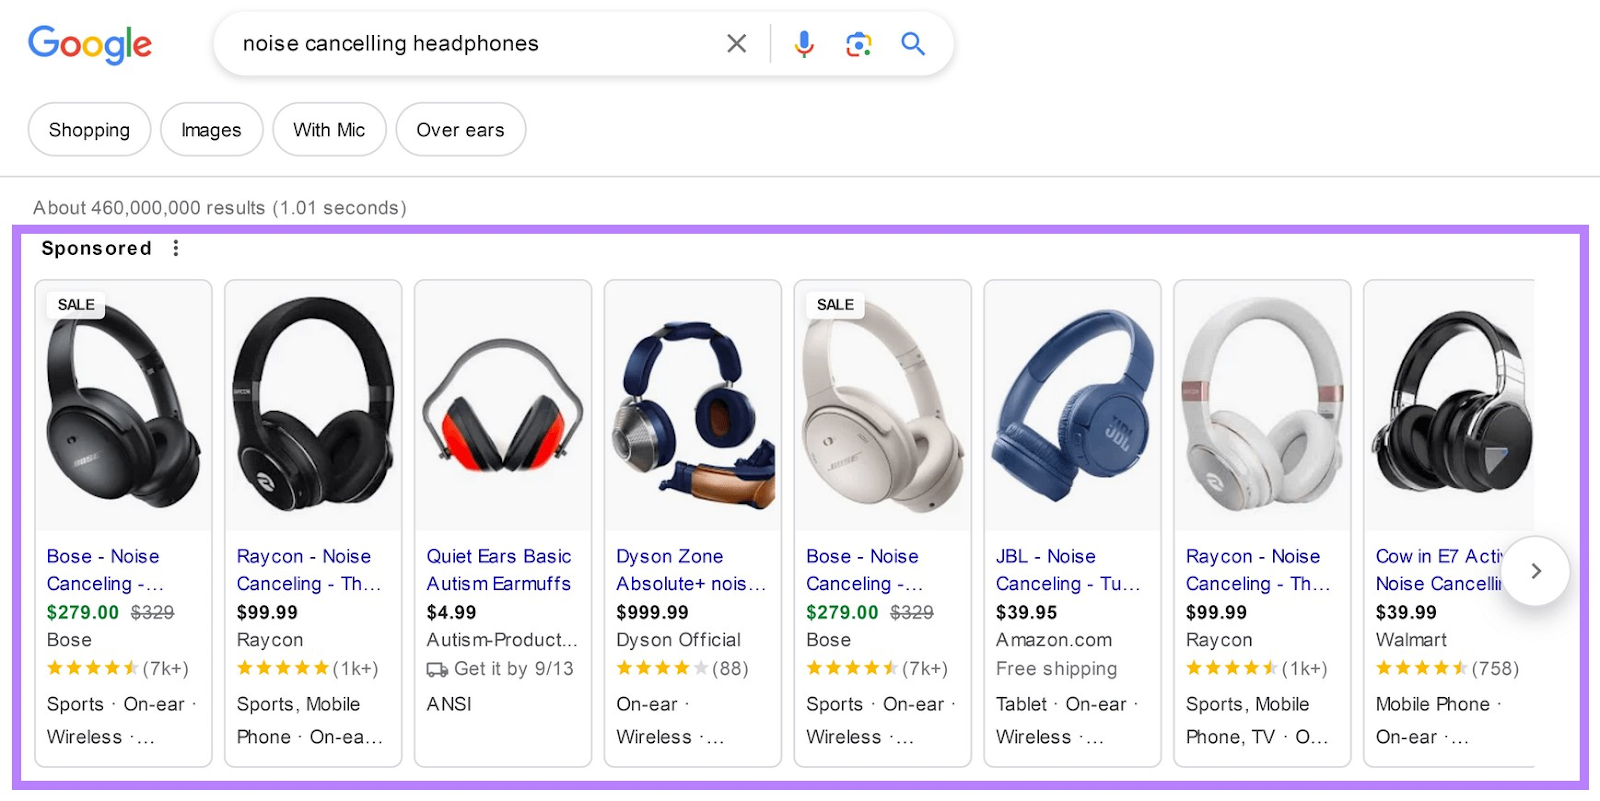 Shopping ads in Google SERP for "noise cancelling headphones" query